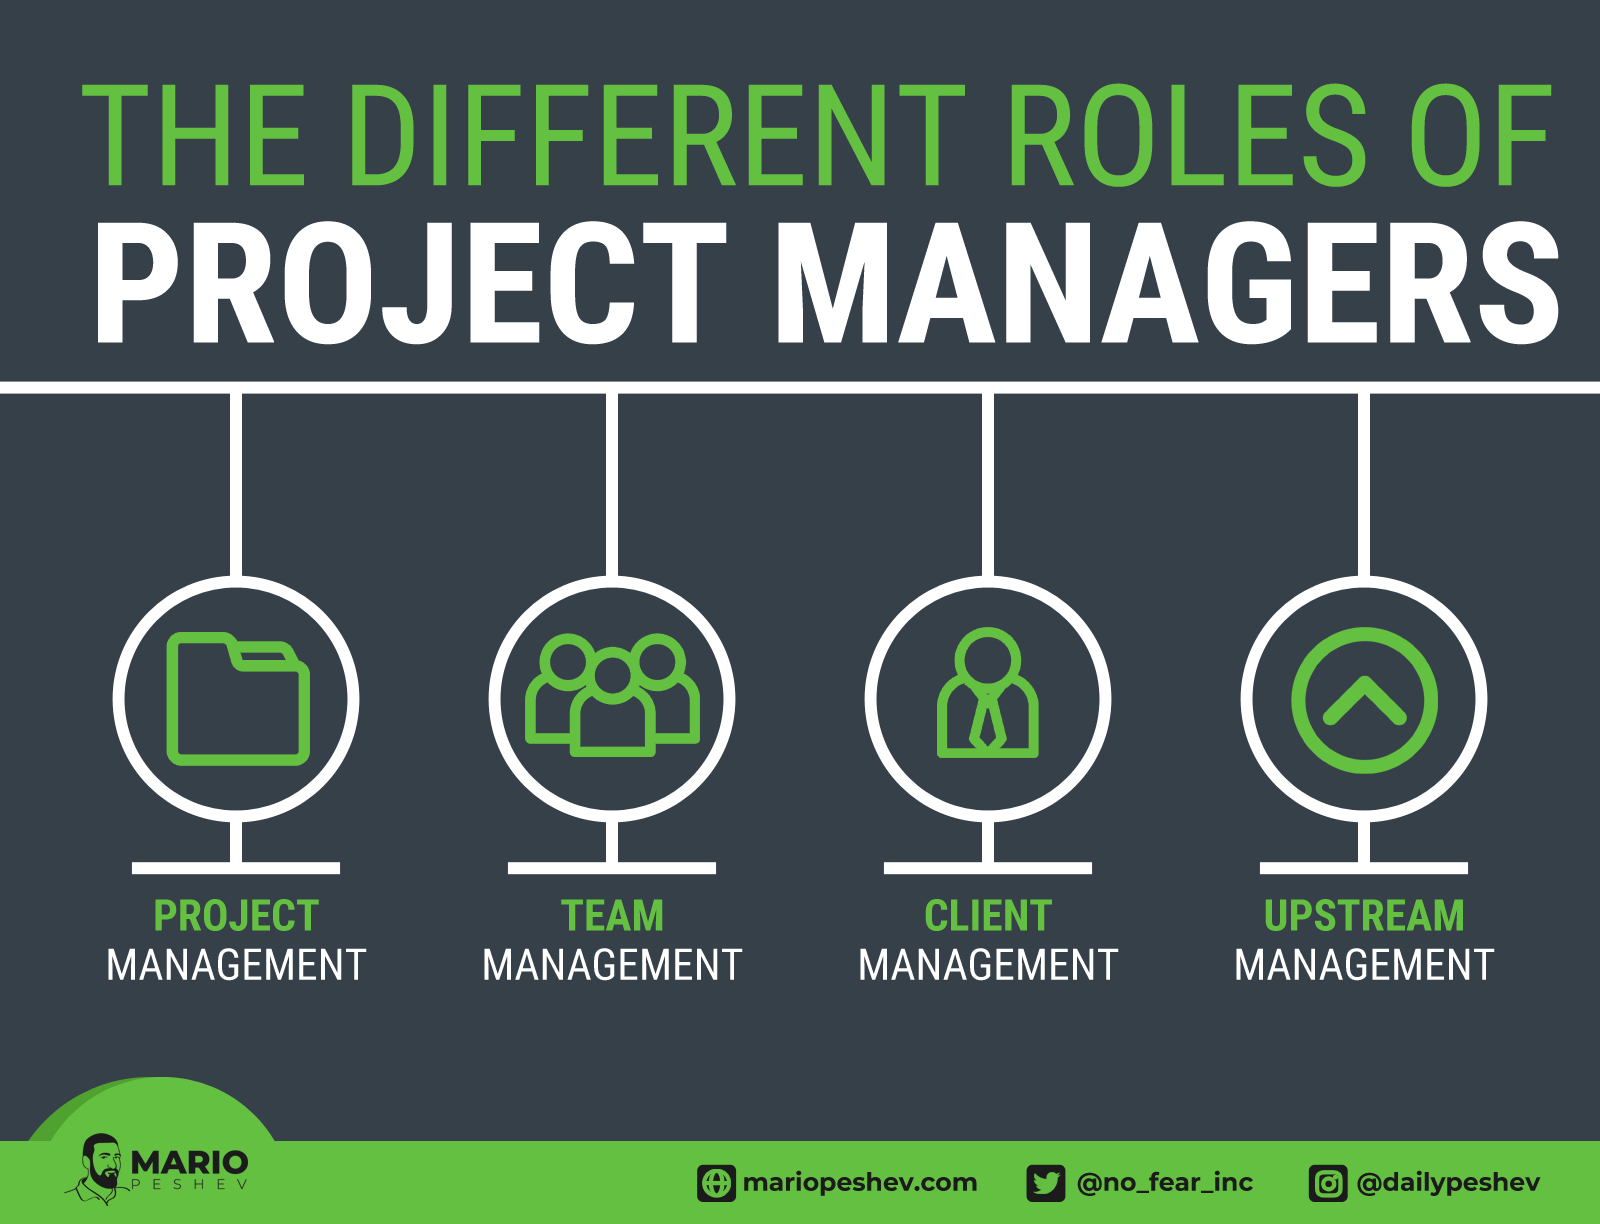 The different roles of Project Managers